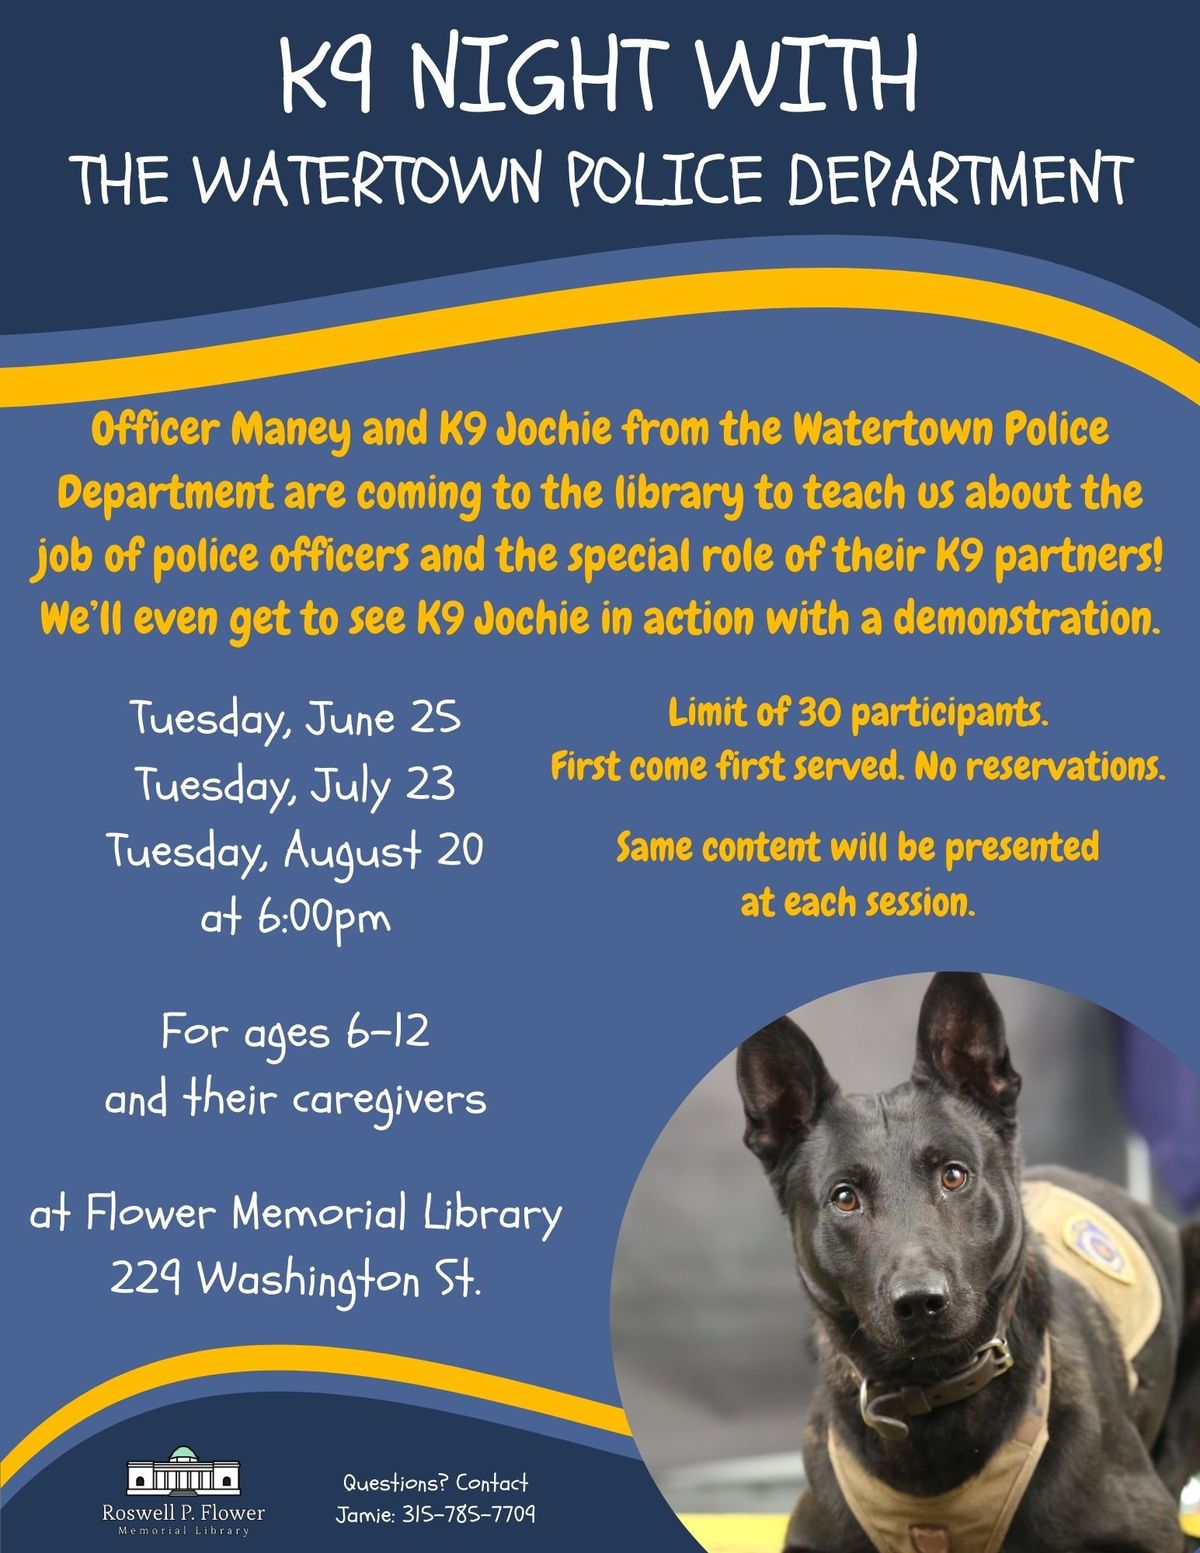 Ages 6-12 K9 Night with the Watertown Police Department